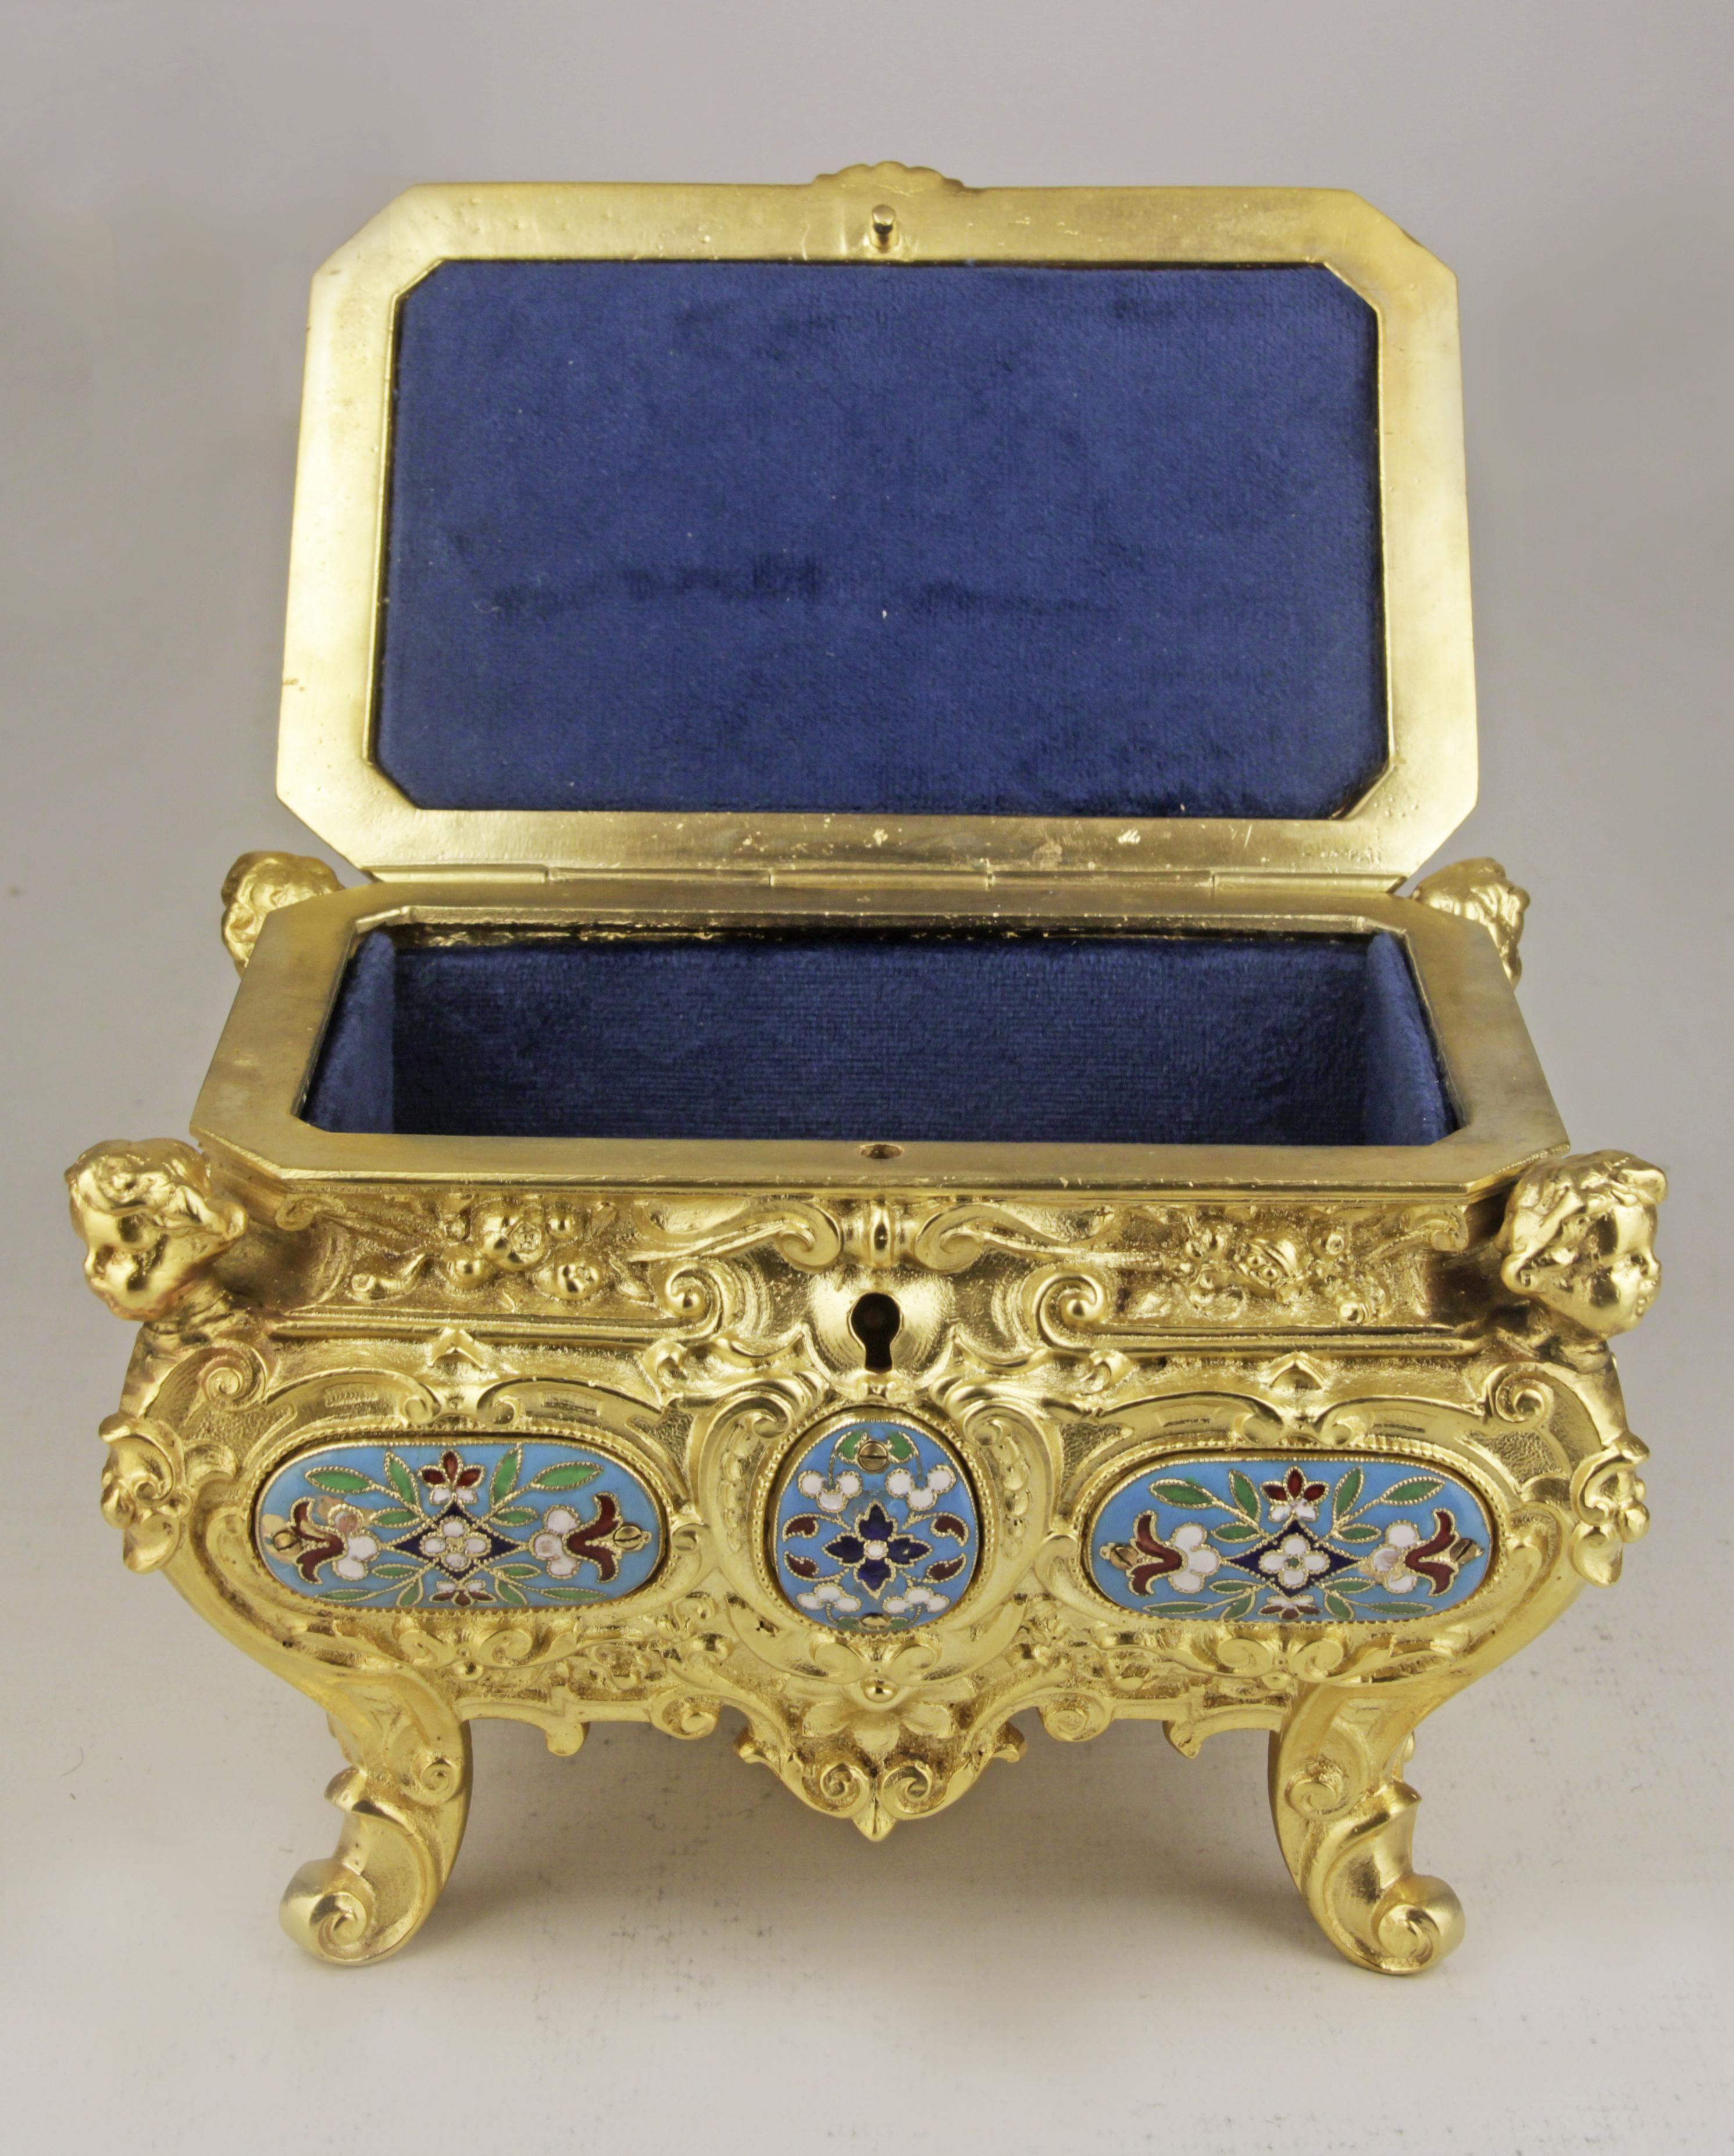 Rococo Revival 19th Century French Empire Cloisonné Bronze Jewelry Casket with Velvet Interior For Sale